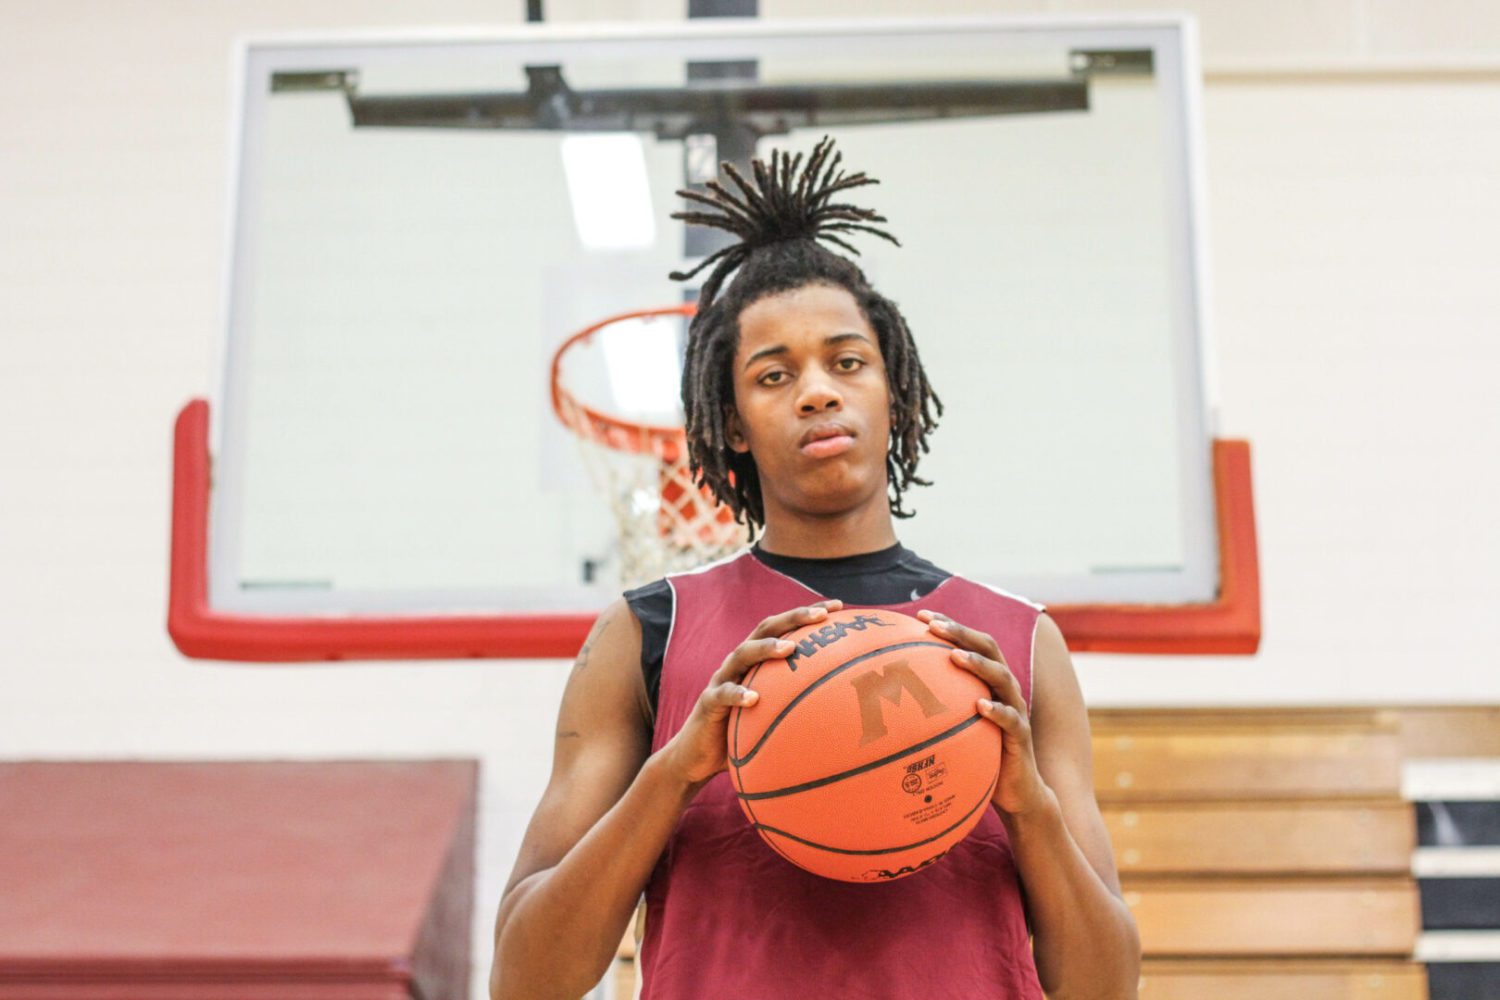 A loss that paid off: The end of Muskegon’s long winning streak brought out the beast in All-Stater Deyonta Davis